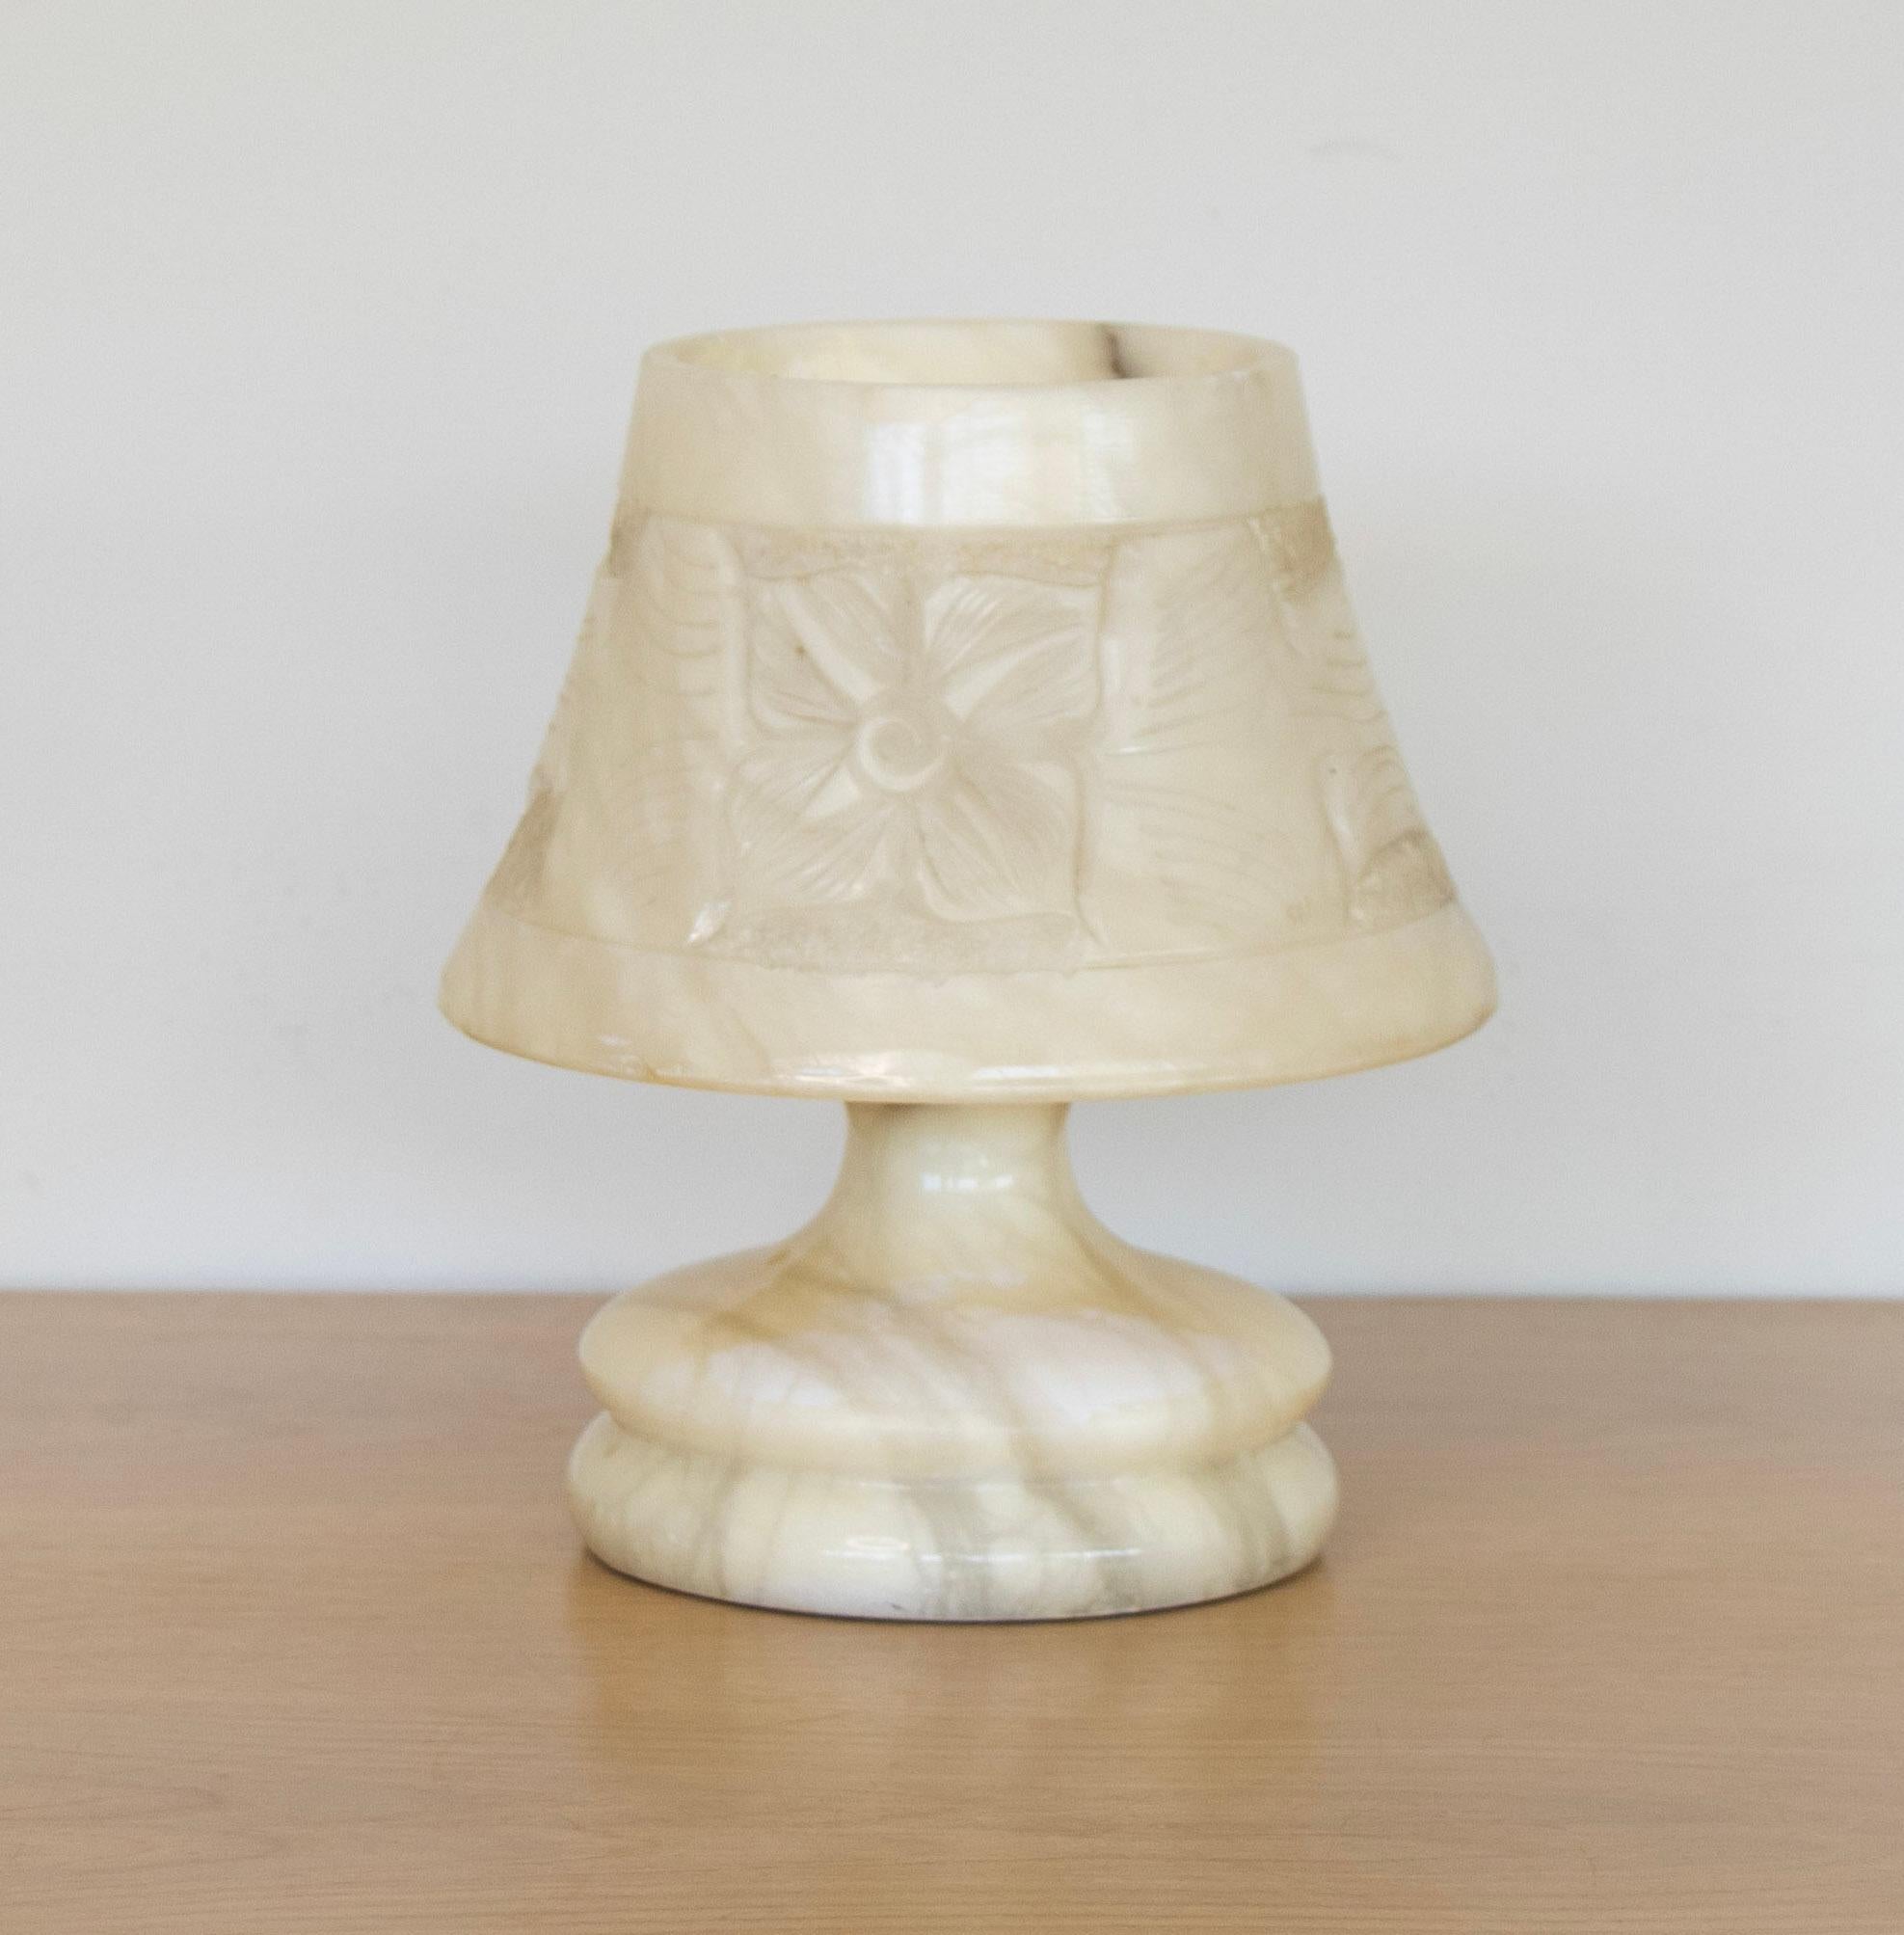 Beautiful petite French alabaster table lamp with carved ribbed base and tapered shade. Stunning intricately carved floral motif on shade. Newly re-wired.